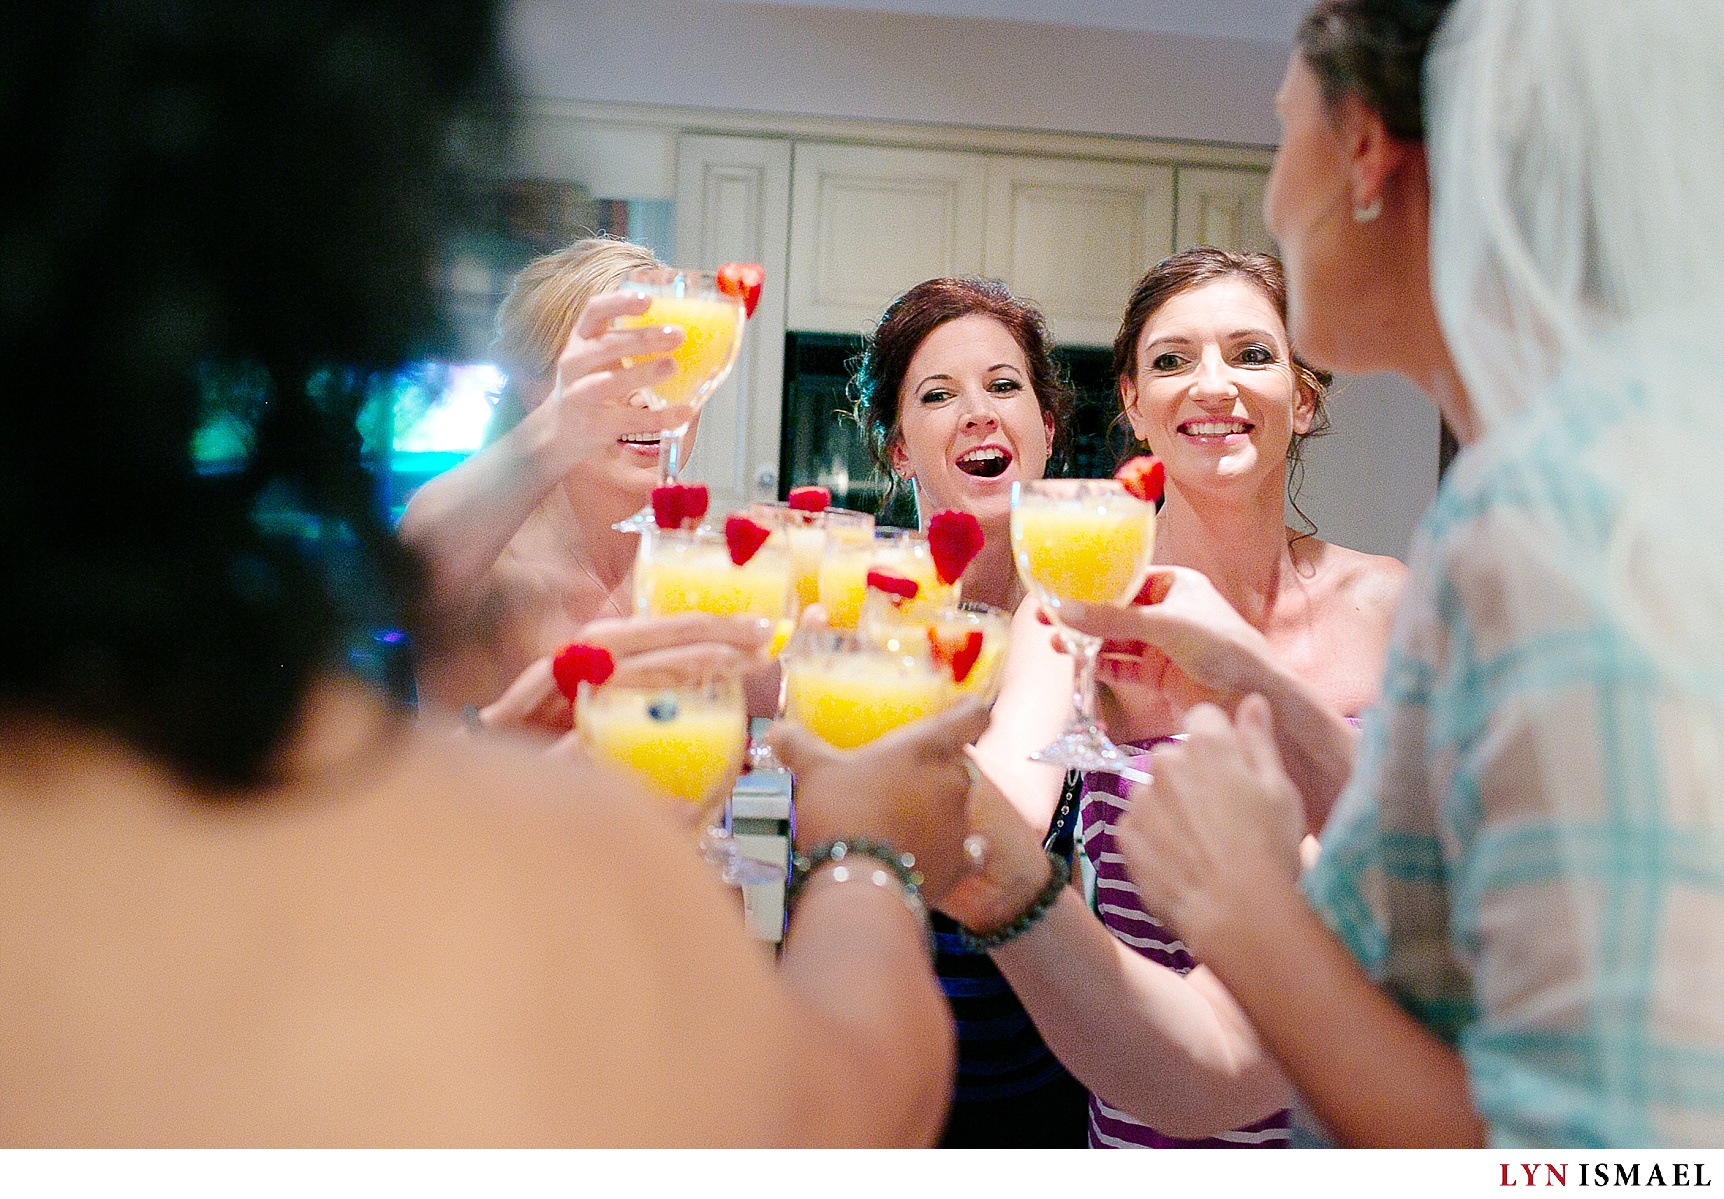 The bride and her bridesmaids share a toast.